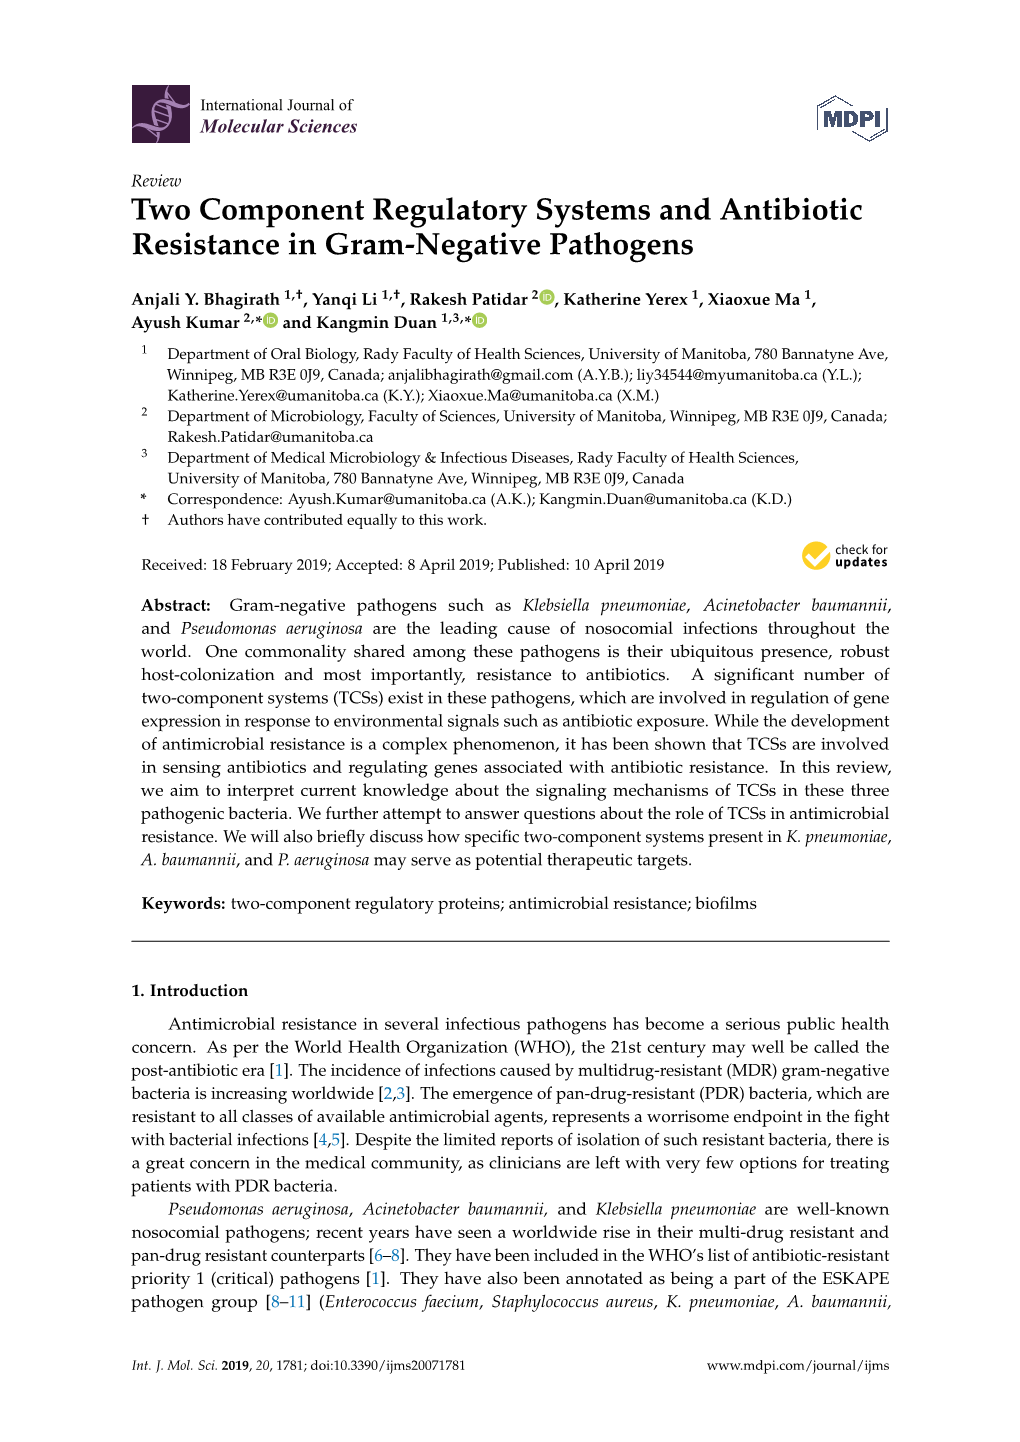 Two Component Regulatory Systems and Antibiotic Resistance in Gram-Negative Pathogens